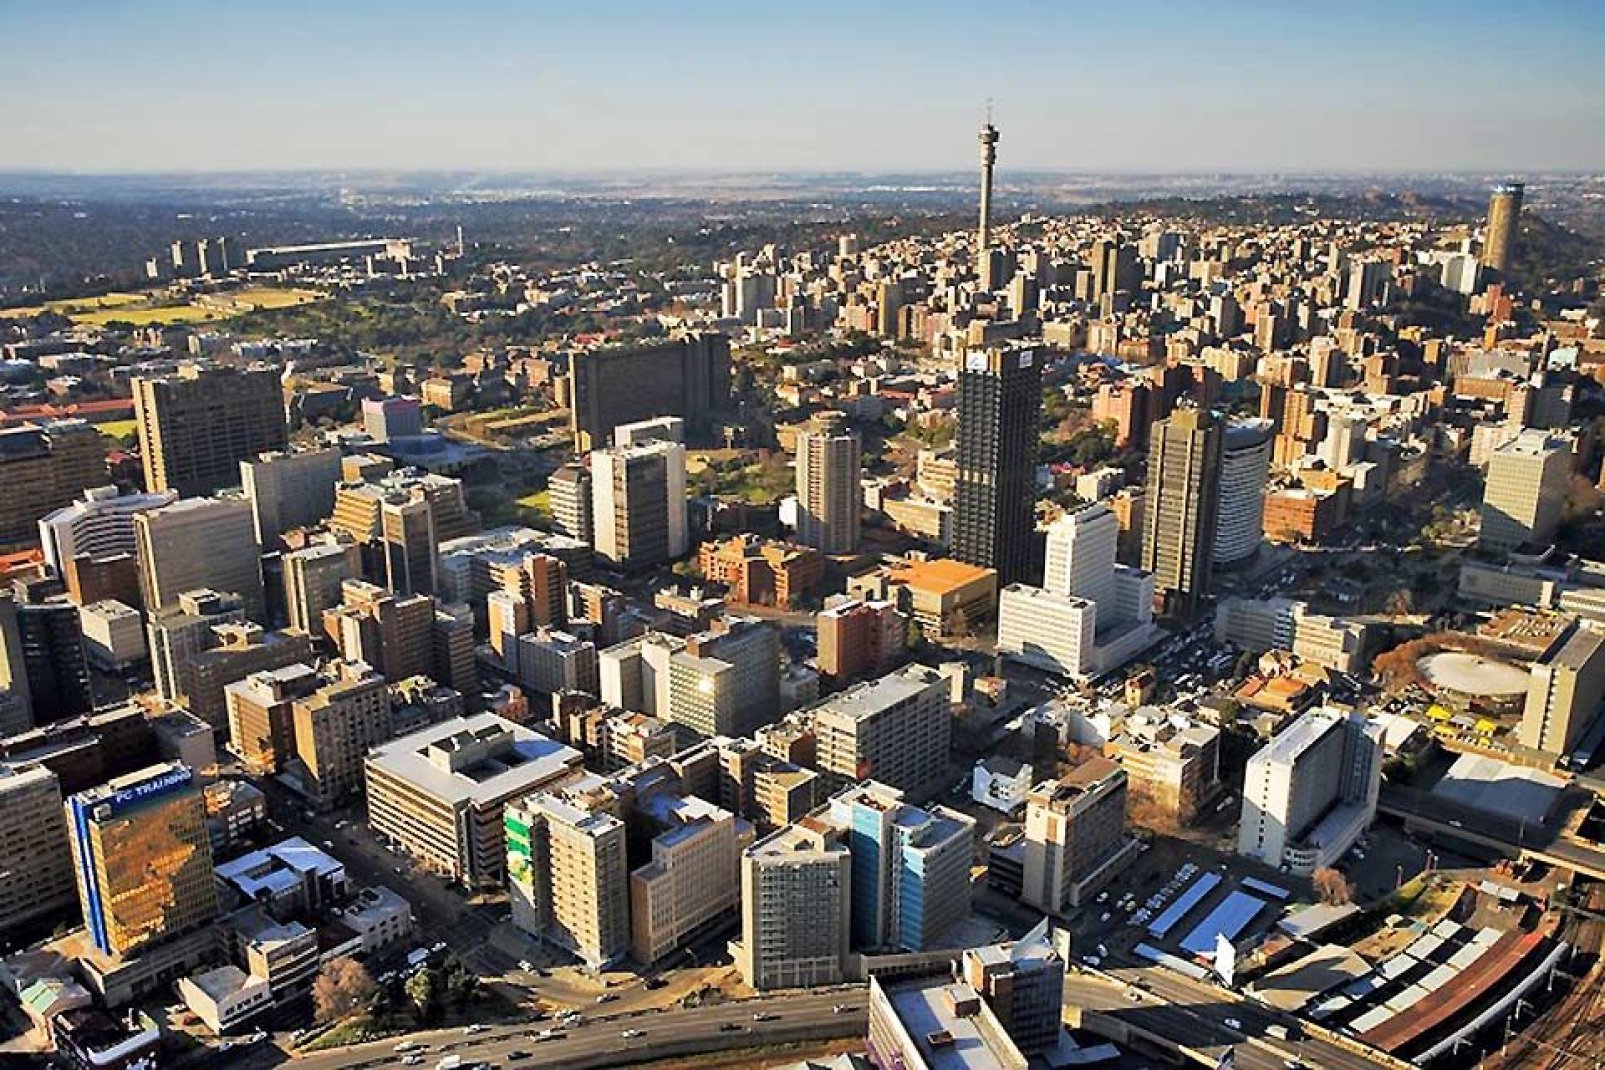 The city of Johannesburg has some 710,000 inhabitants, making it the most heavily-populated city in South Africa.